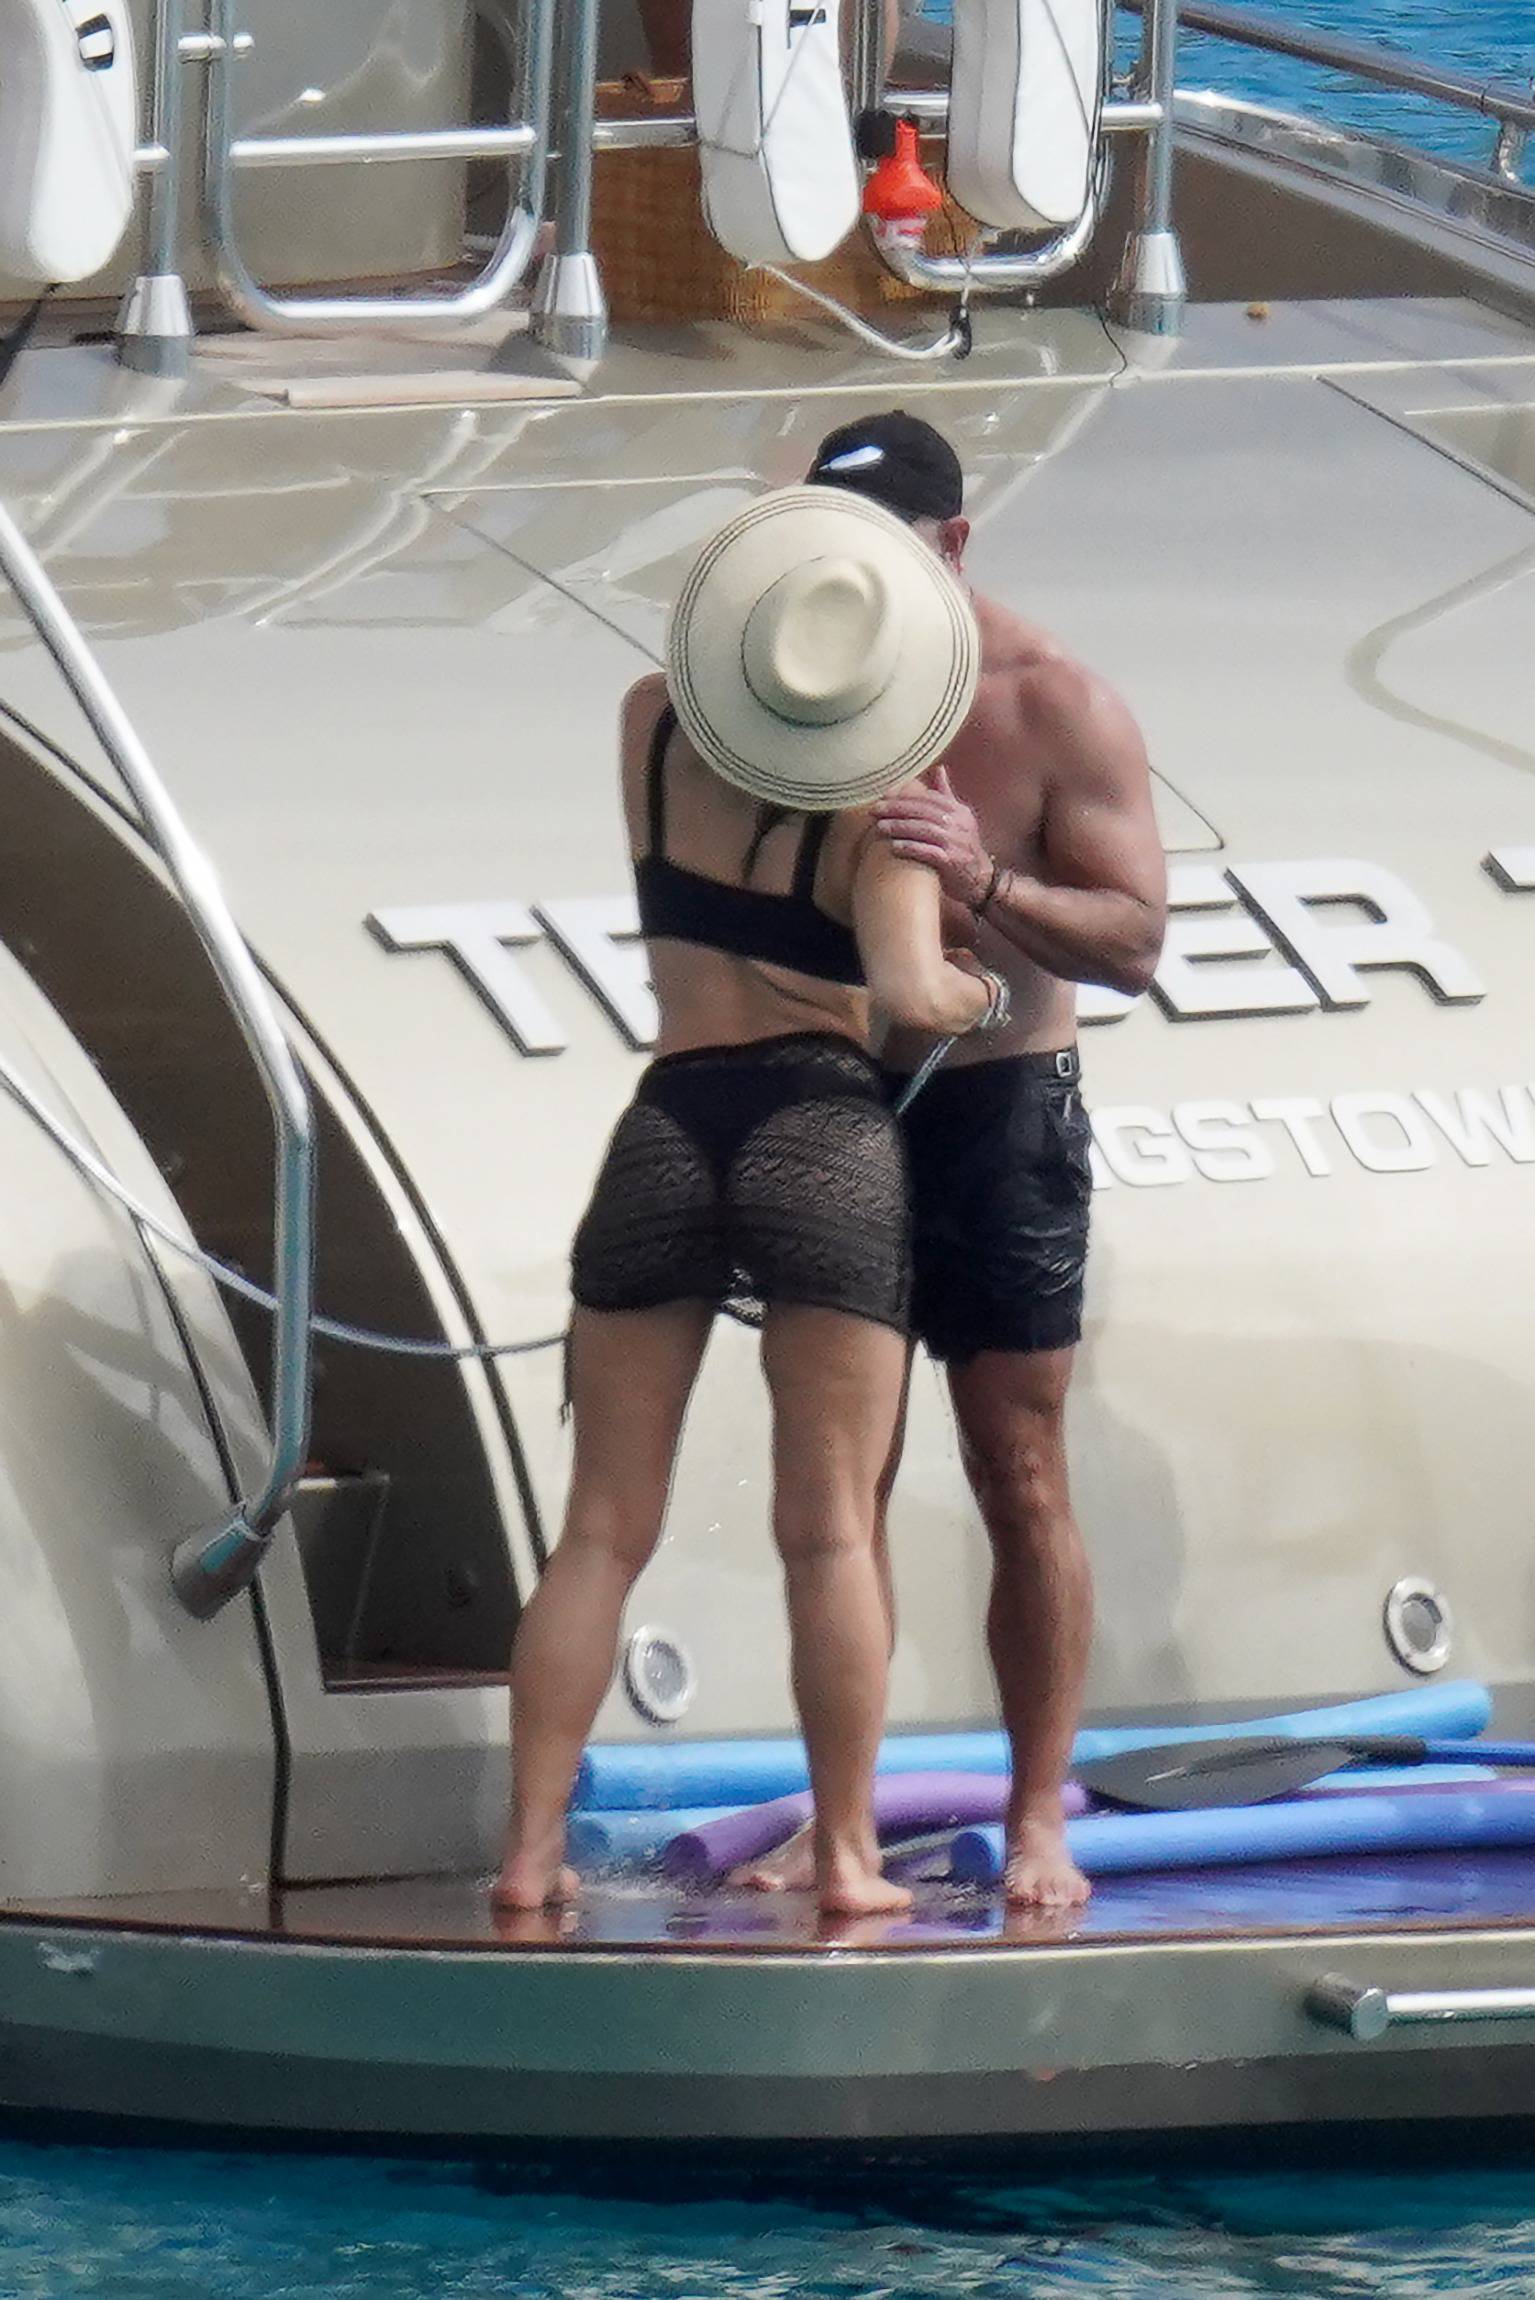 EXCLUSIVE: Billionaire beefcake Jeff Bezos and Lauren Sanchez enjoy a boat day with their family during holiday season in St Barts